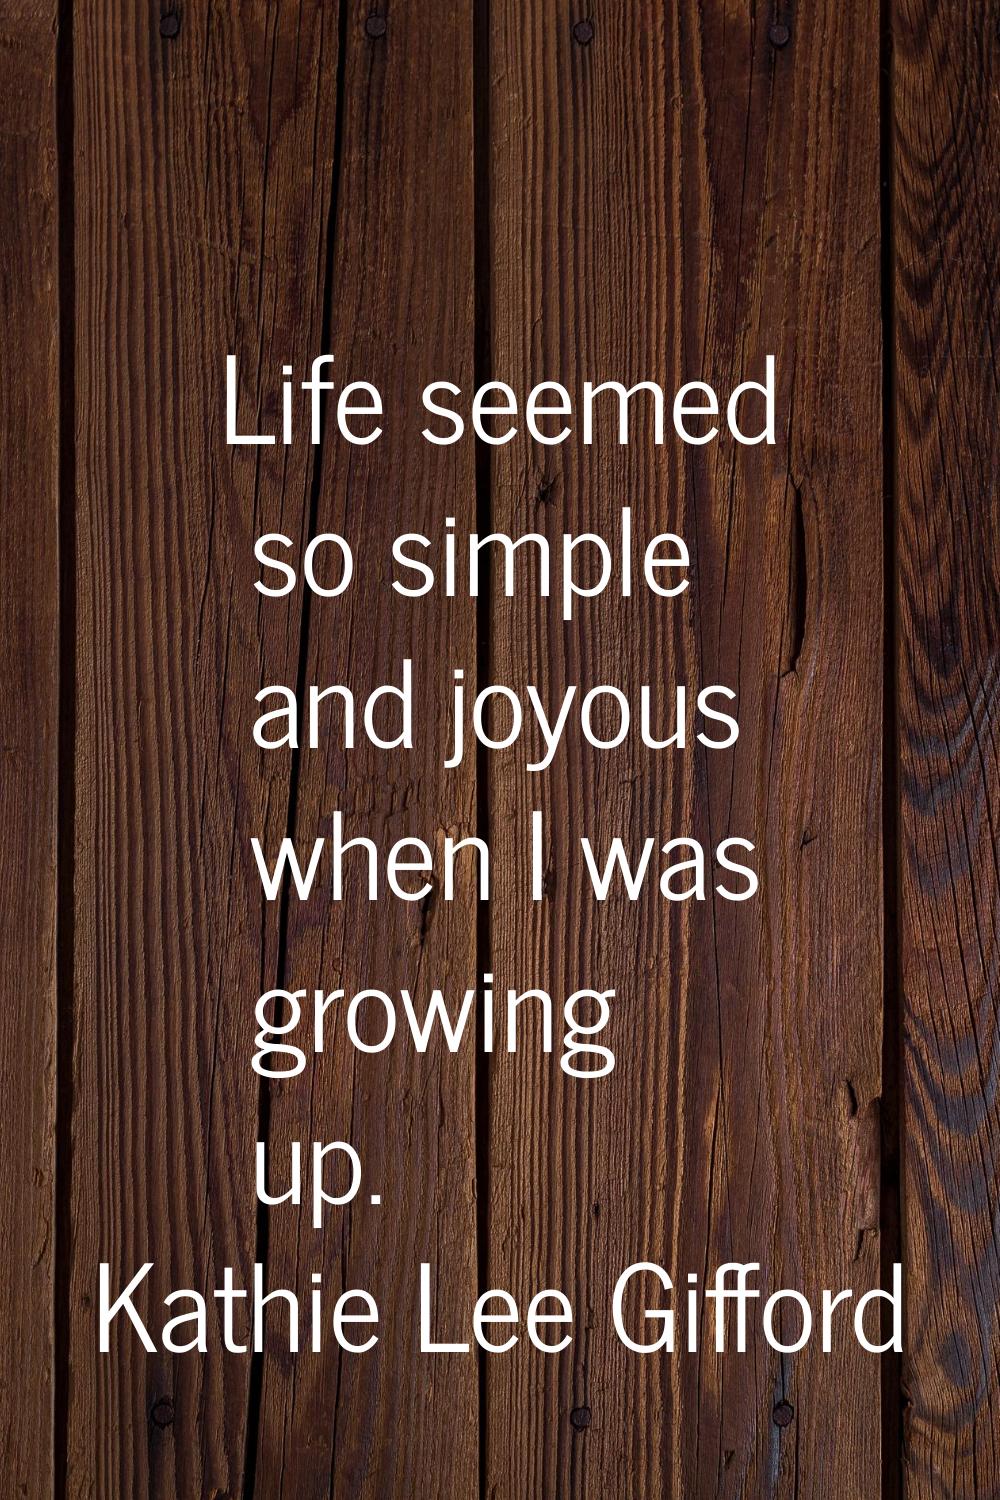 Life seemed so simple and joyous when I was growing up.